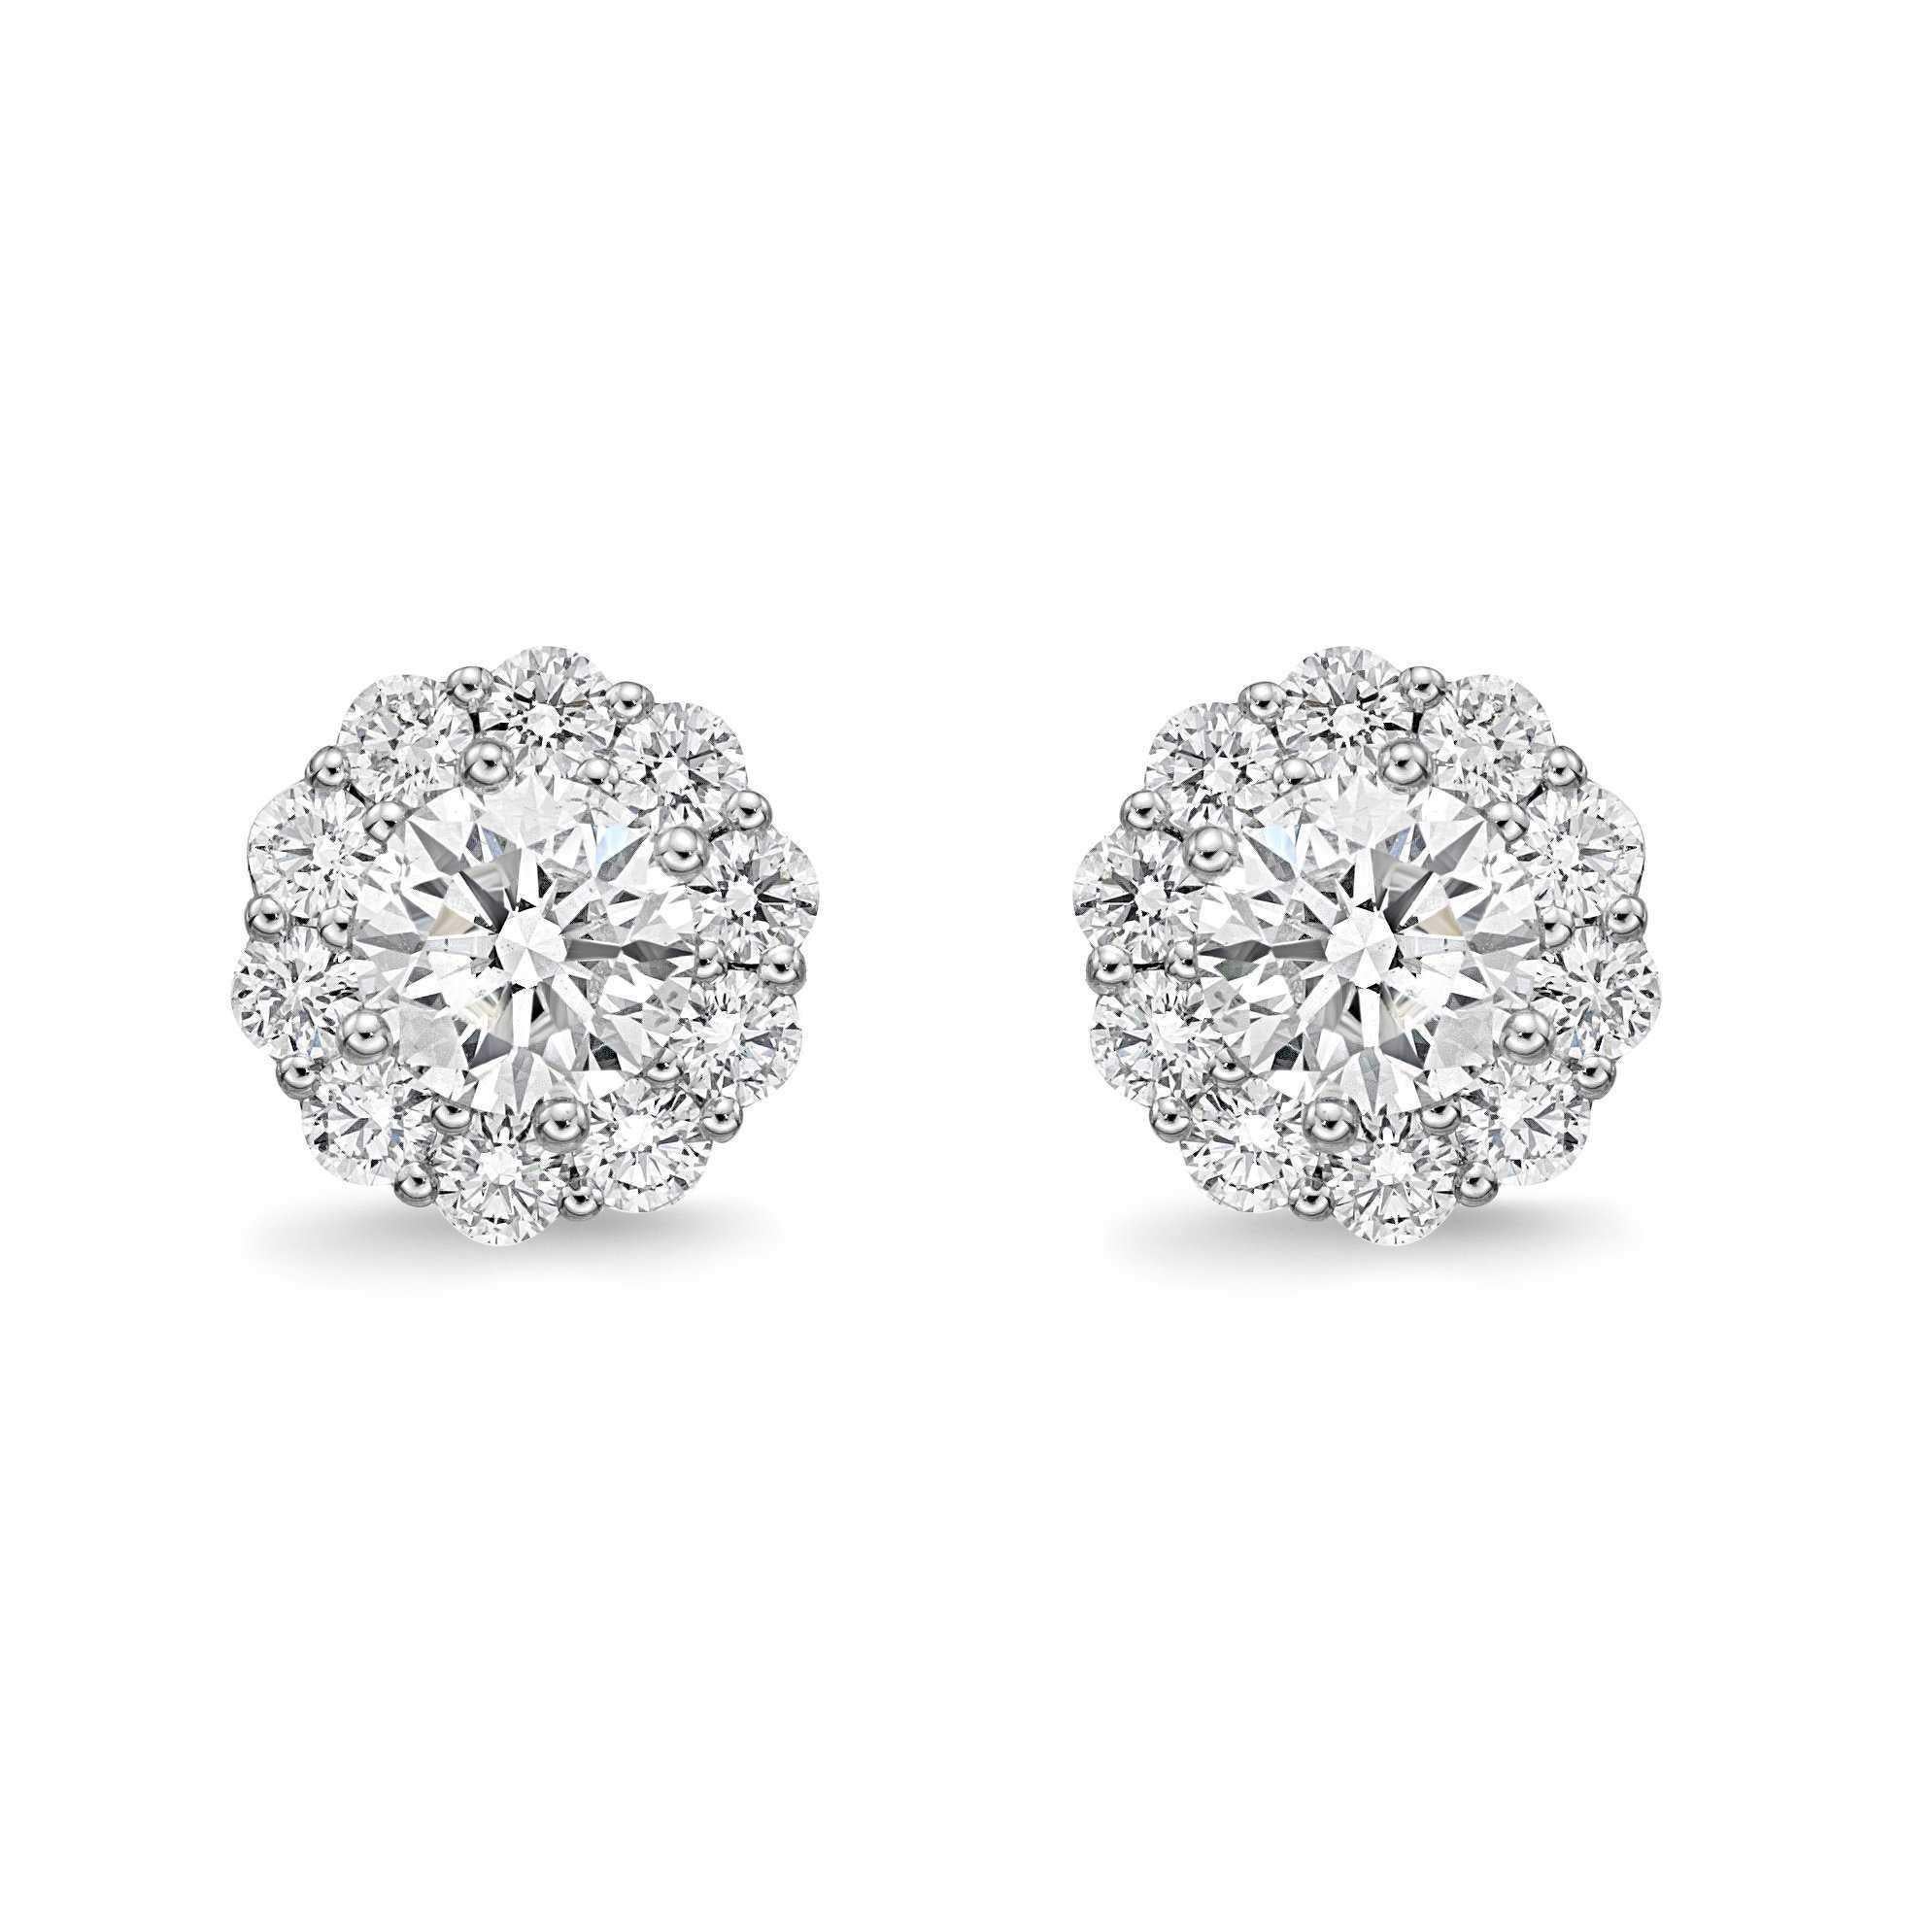 Memoire Blossom Collection Diamond Stud Earrings 1.52 ctw 18K White Gold

Memoire Blossom Collection Diamond Earrings  Blossom Earrings Memoire collection. Set in 18K White Gold.

Additional Information:
22 Diamonds equal 1.52cts t.w.
Color: G-H